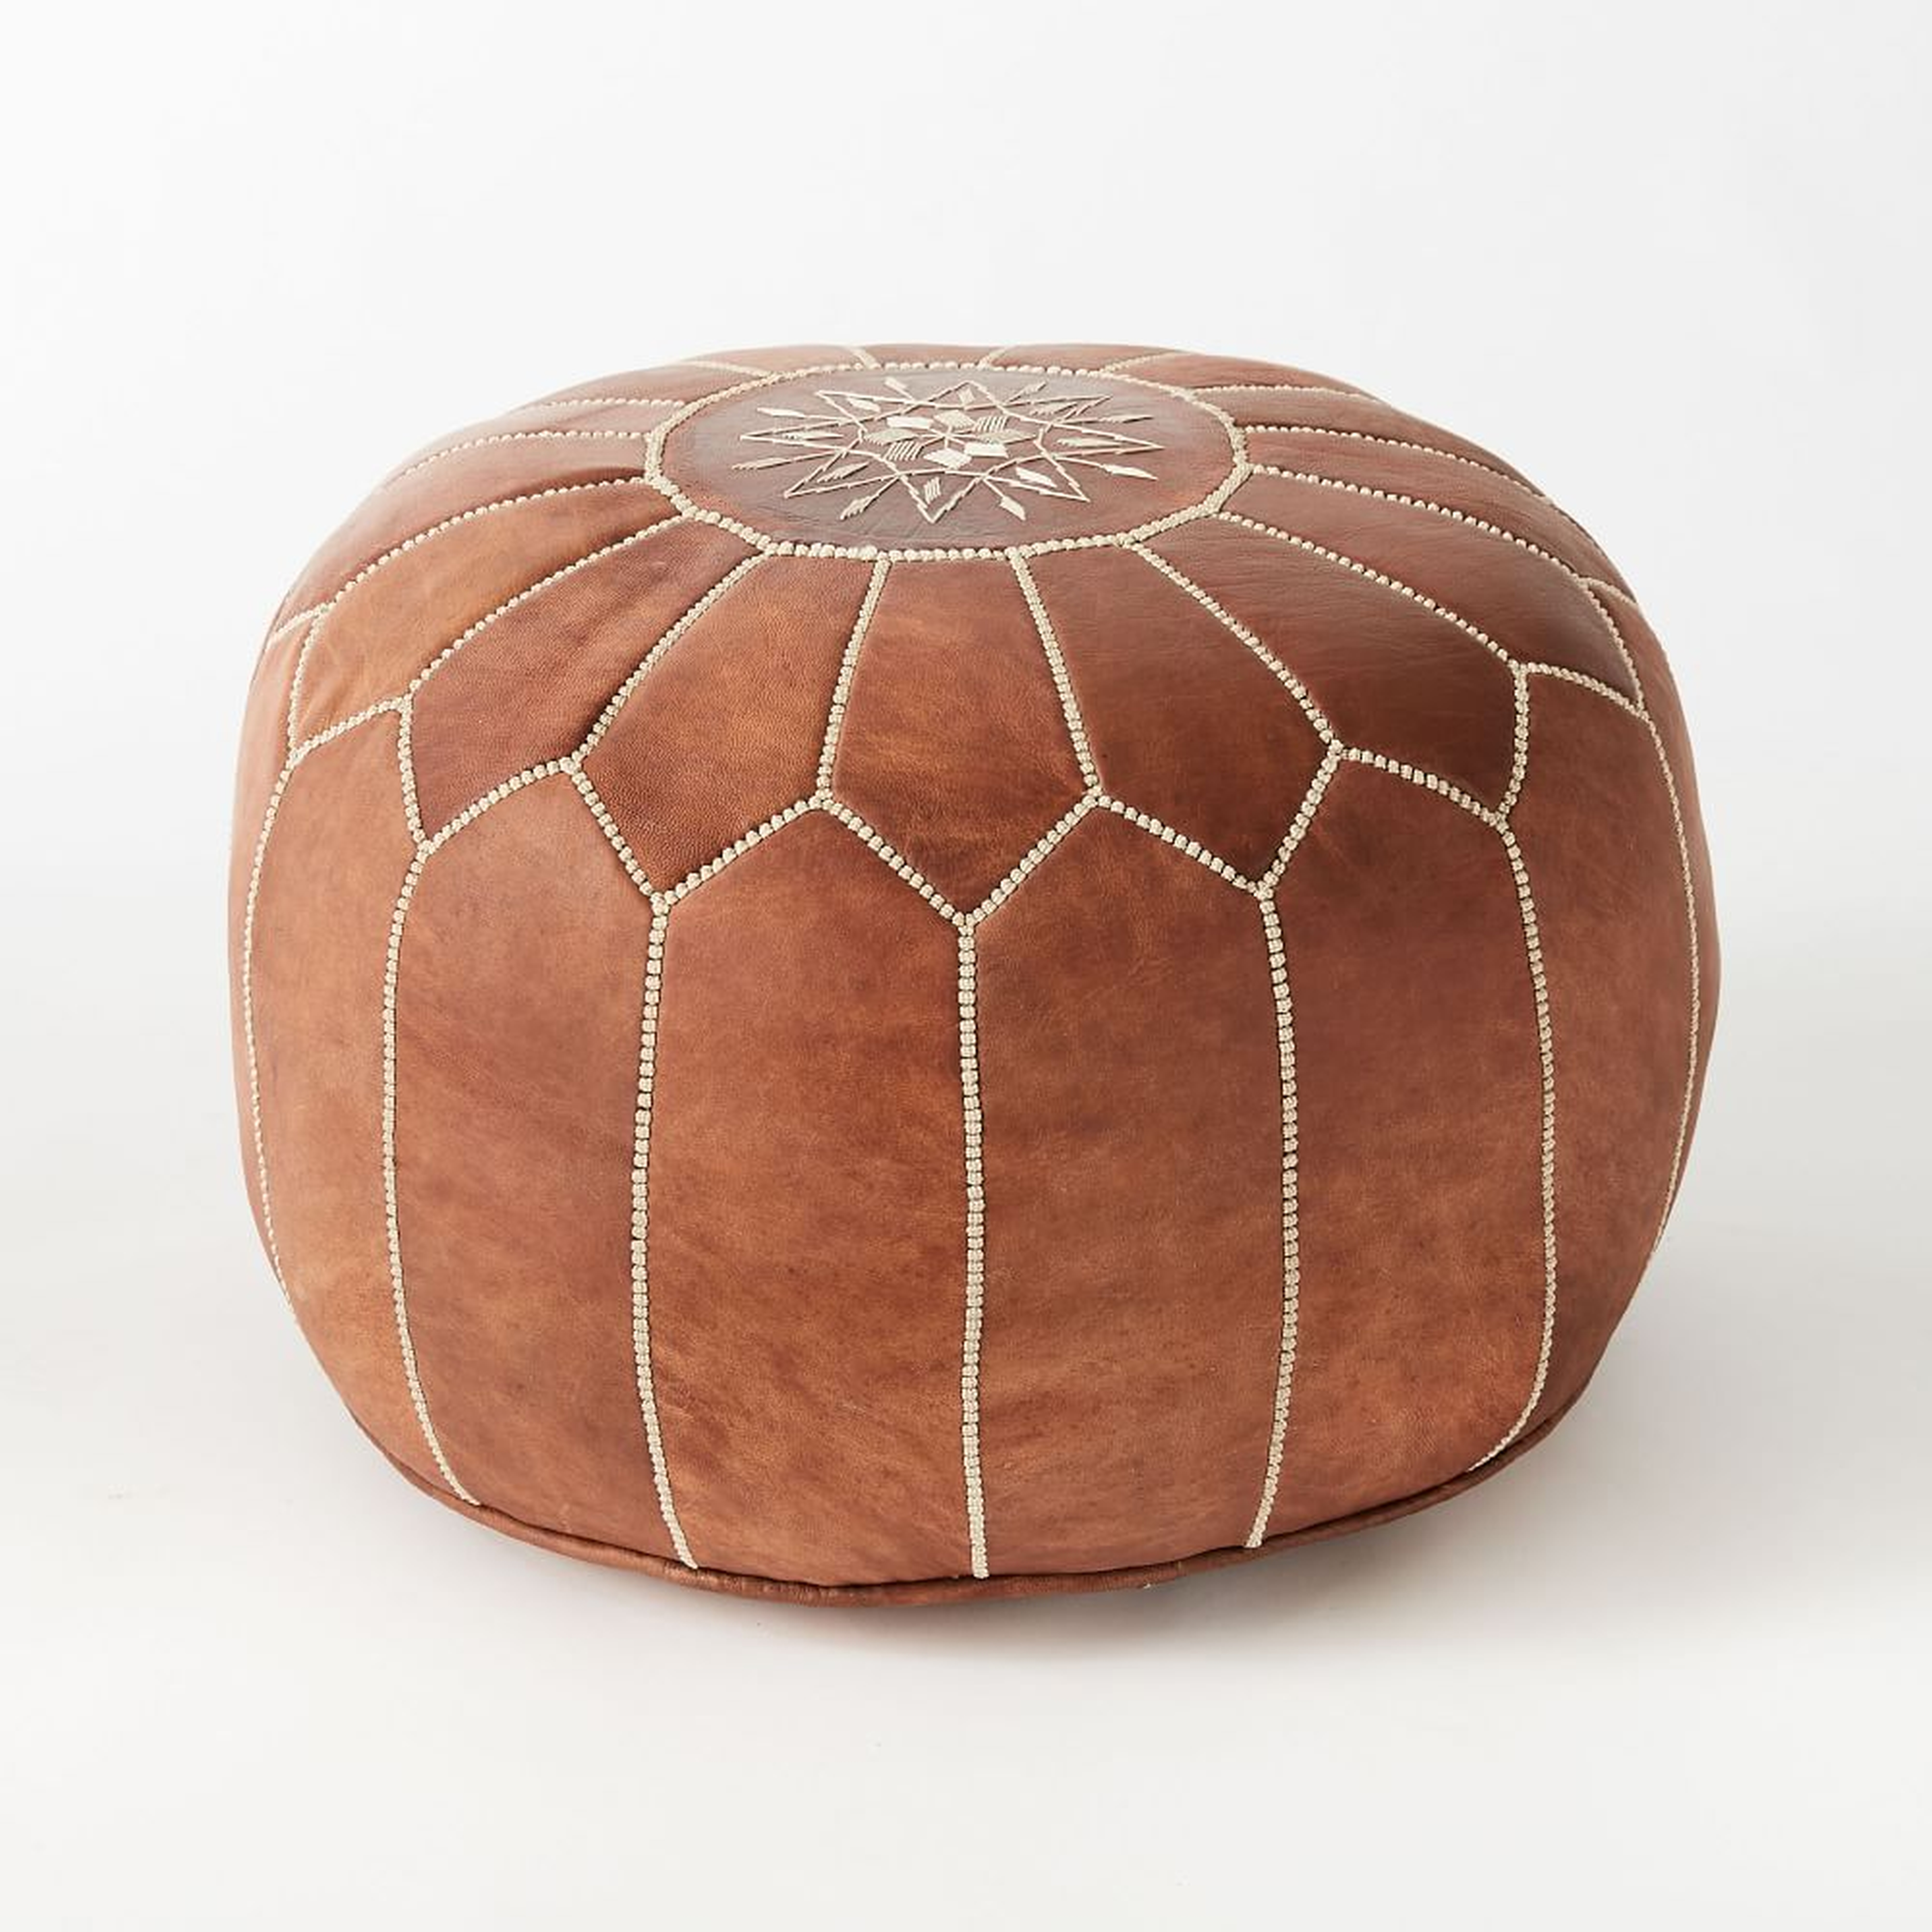 Leather Moroccan Pouf, Tan - West Elm